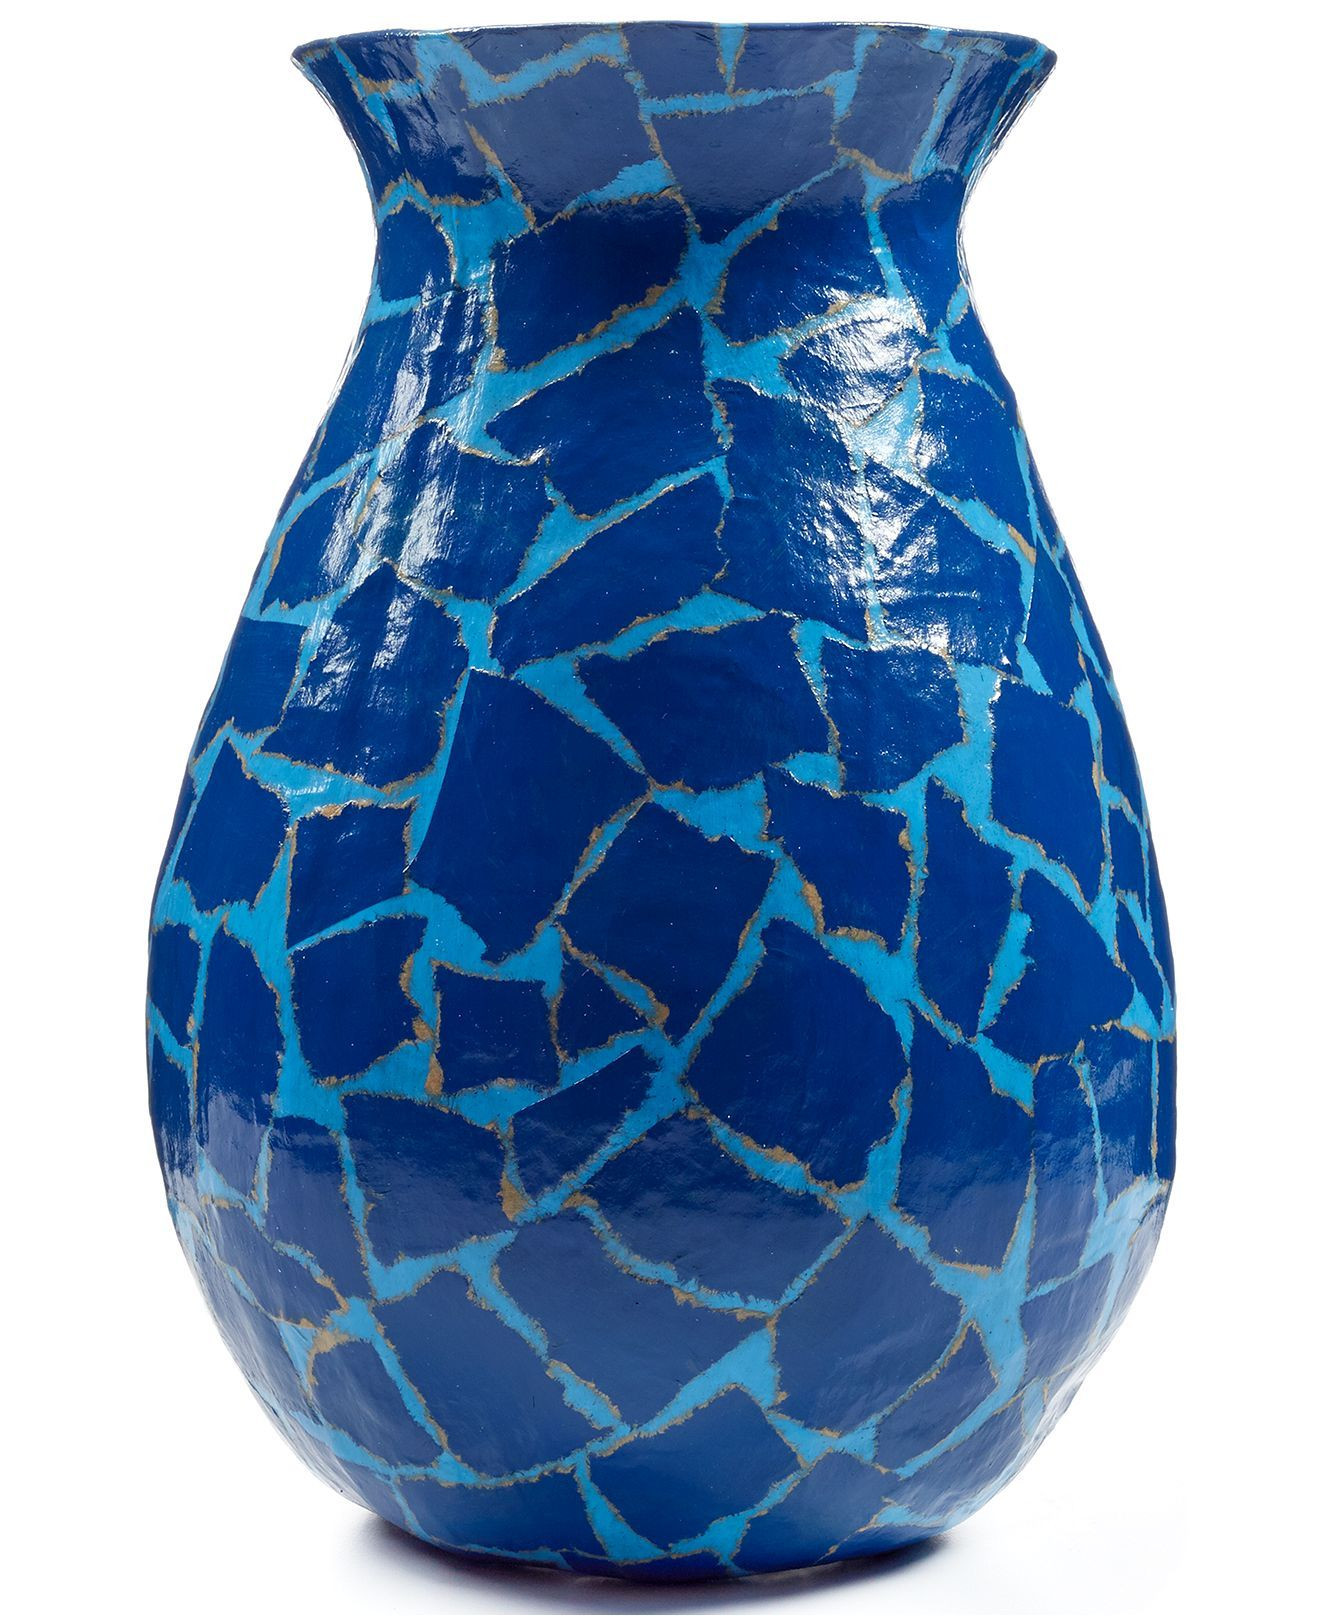 14 Lovable Blue Square Vase 2024 free download blue square vase of heart of haiti large papier mache blue squares vase collections regarding heart of haiti large papier mache blue squares vase collections for the home macys